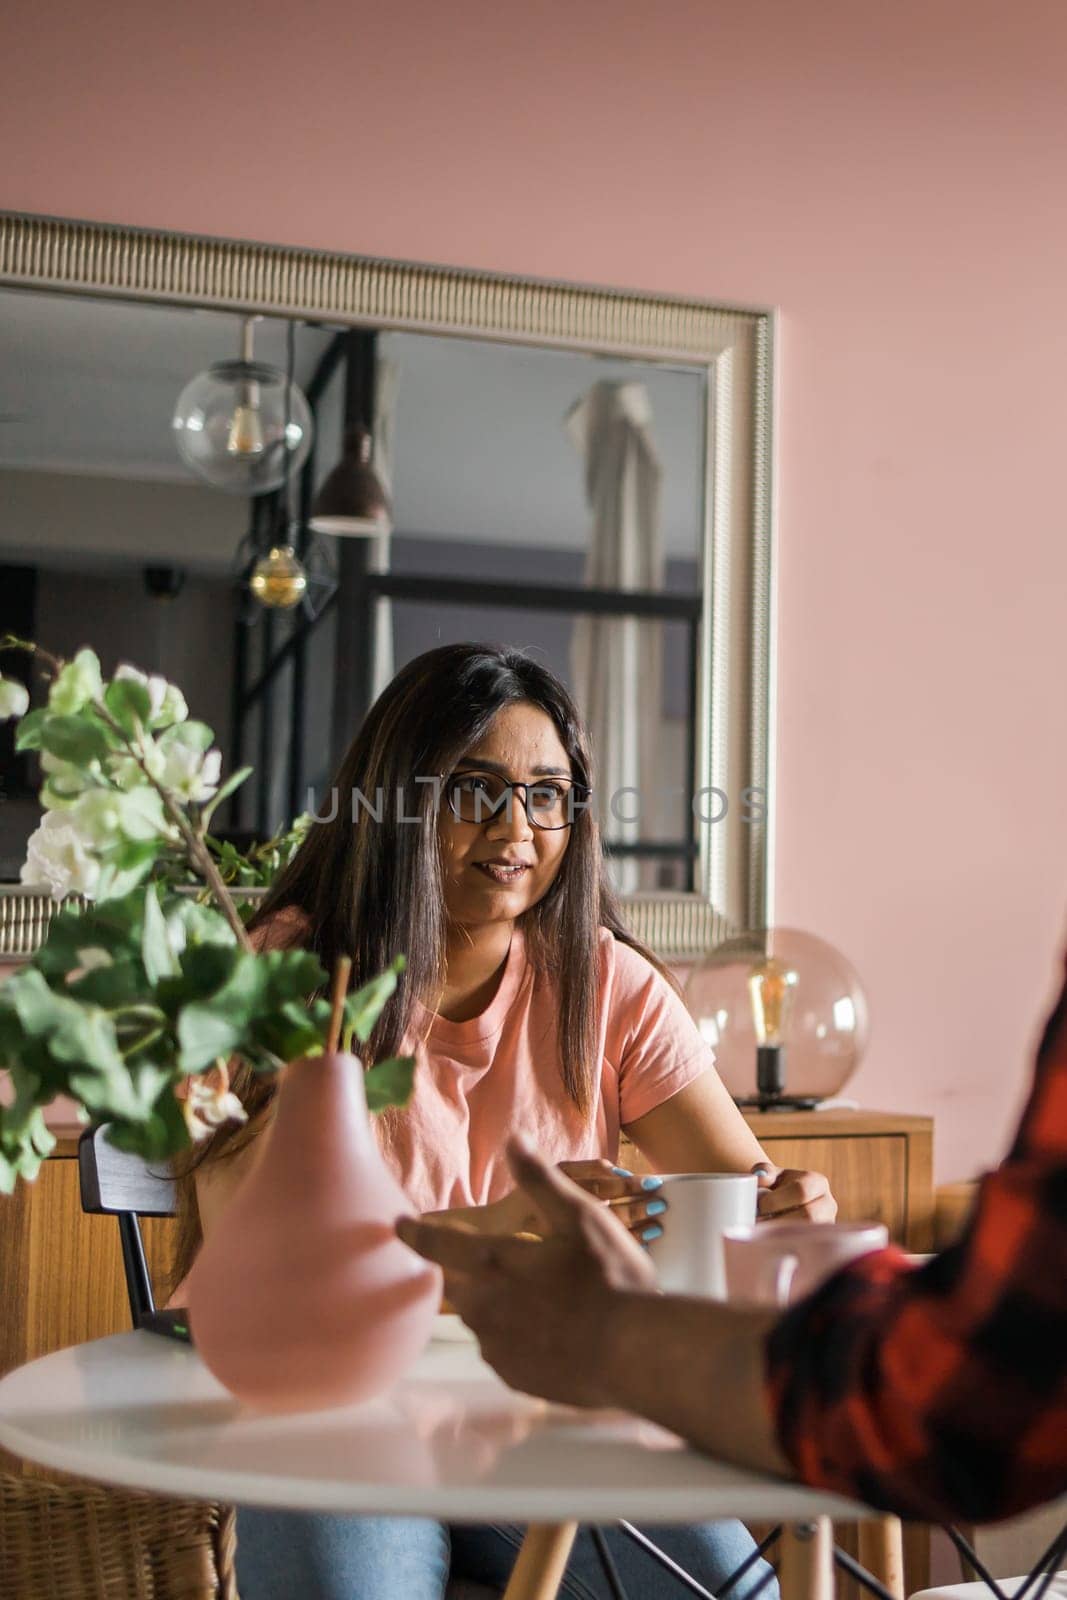 Happy couple eating breakfast and talking at dining table in morning. Indian girl and latino guy. Relationship and diversity concept by Satura86